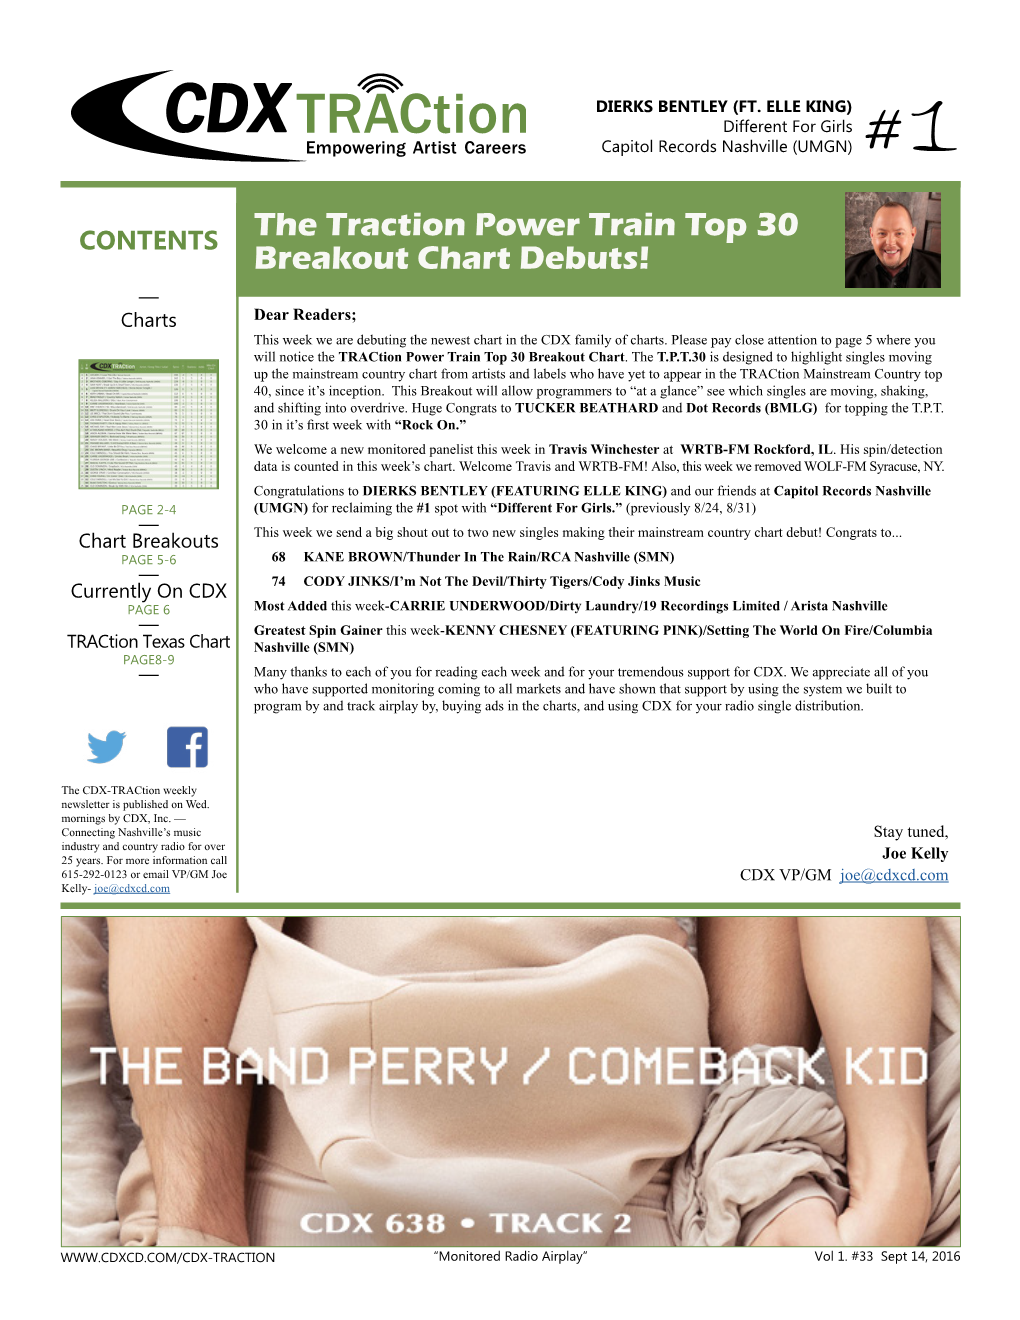 The Traction Power Train Top 30 Breakout Chart